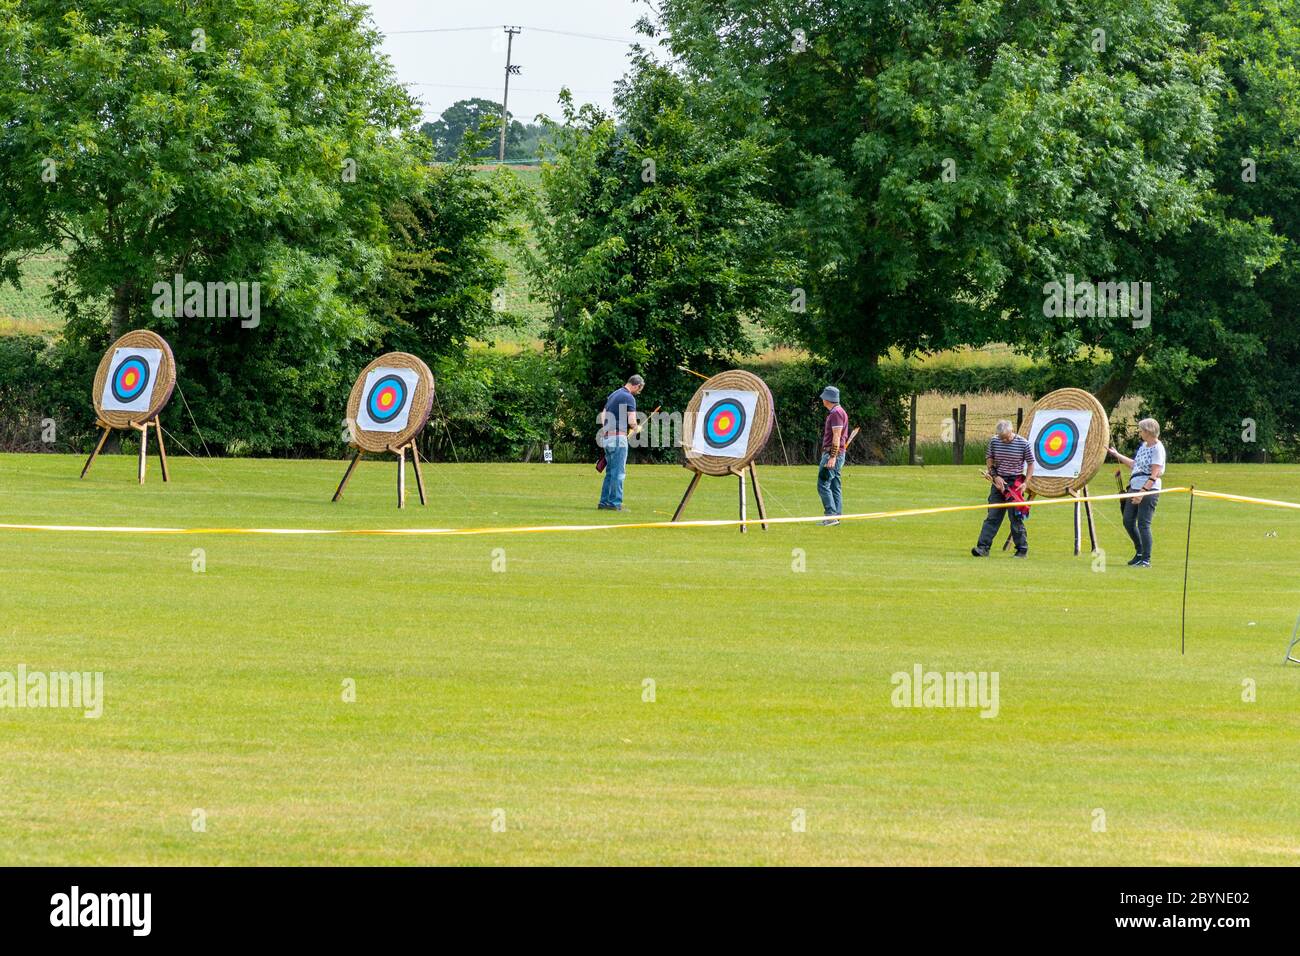 Archery is one of the sports now allowed following easing of the coronavirus covid-19 lockdown in the UK as social distancing is possible June 2020. Stock Photo